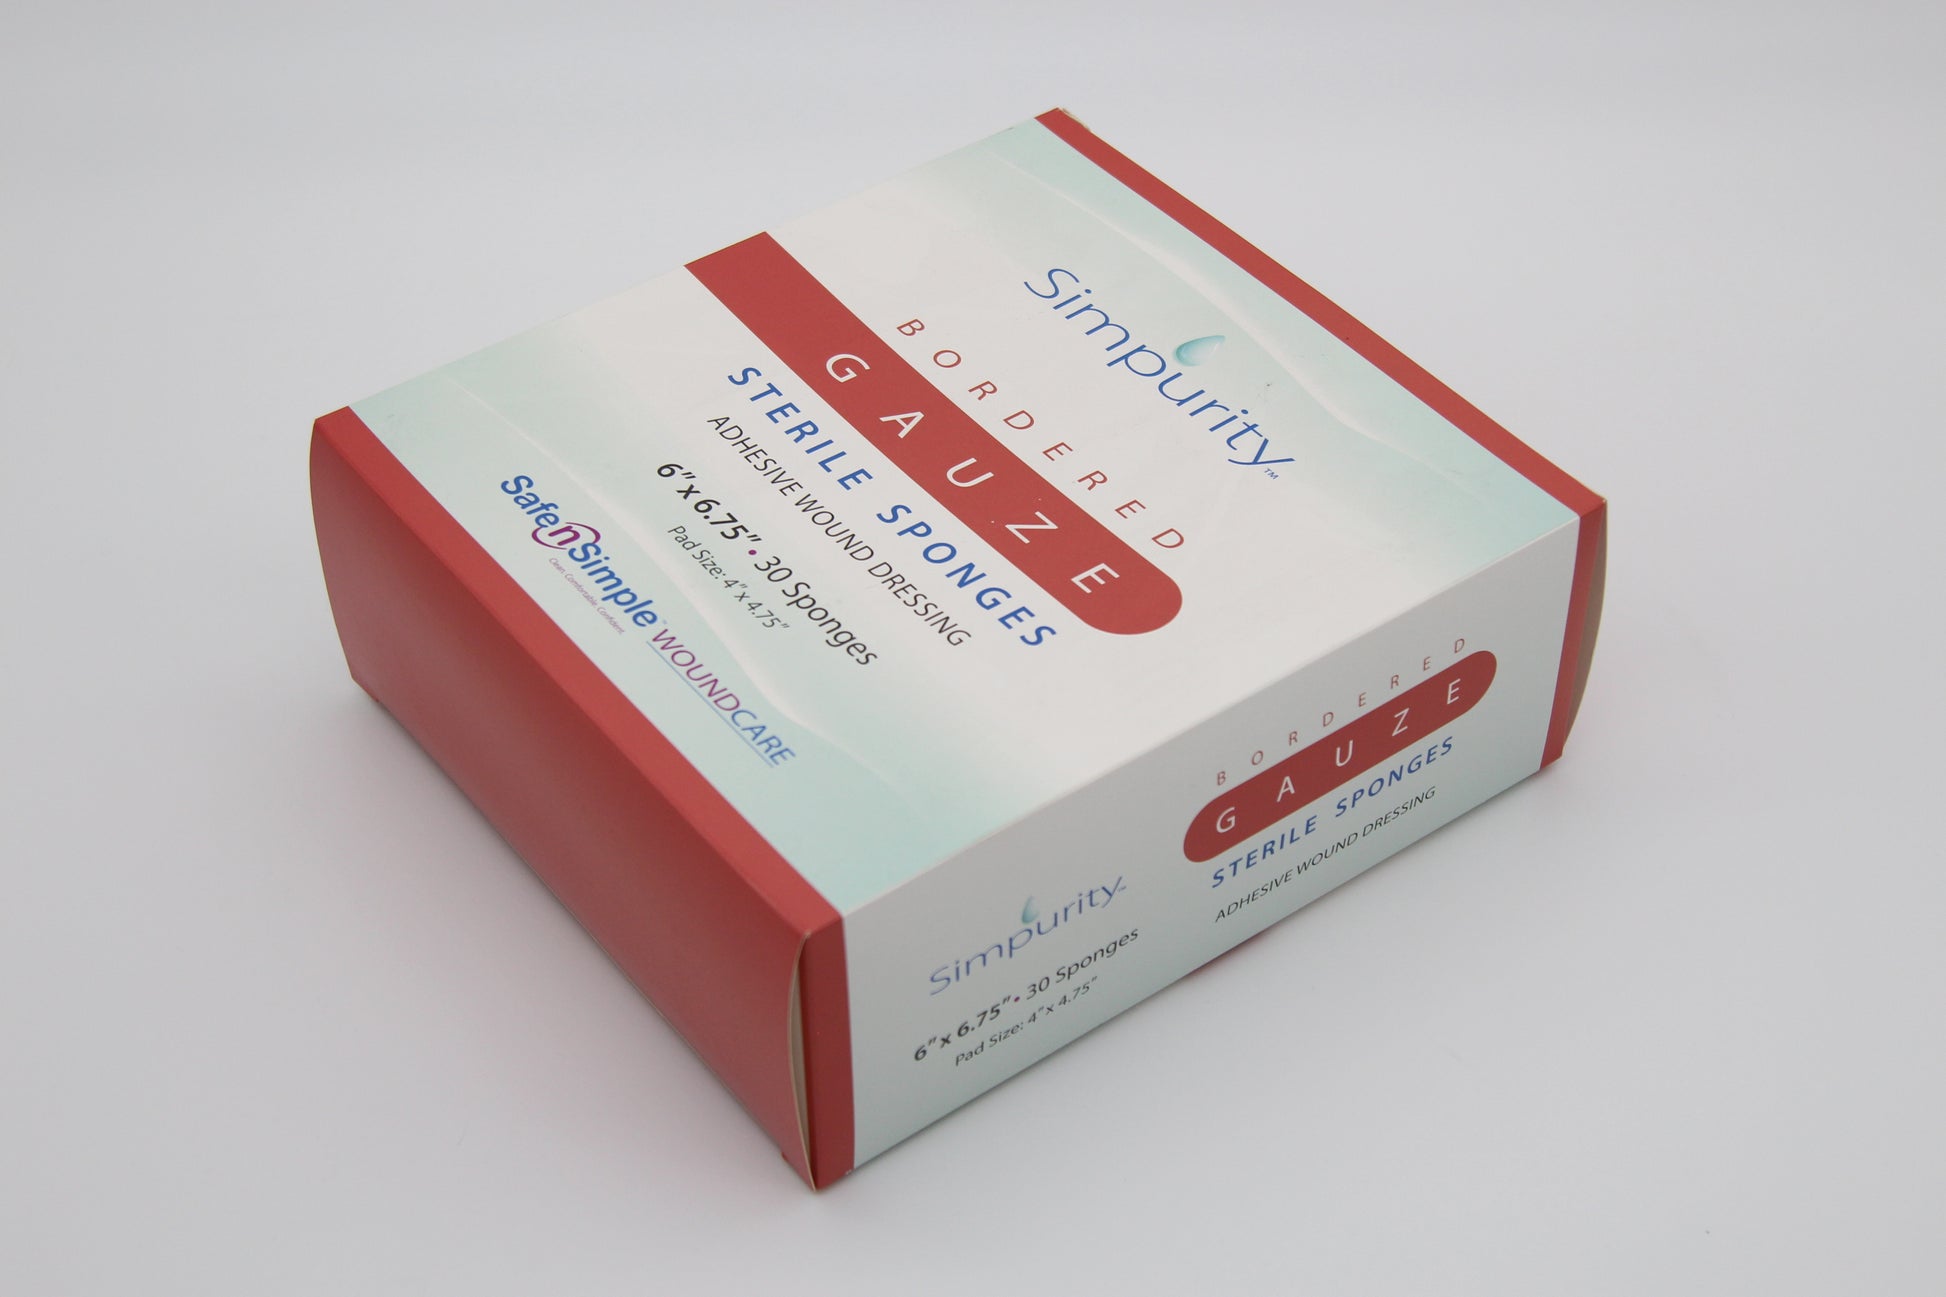 Bordered Gauze Dressings | Advanced wound care | Wound care dressing | SNS medical  | Safe n Simple   